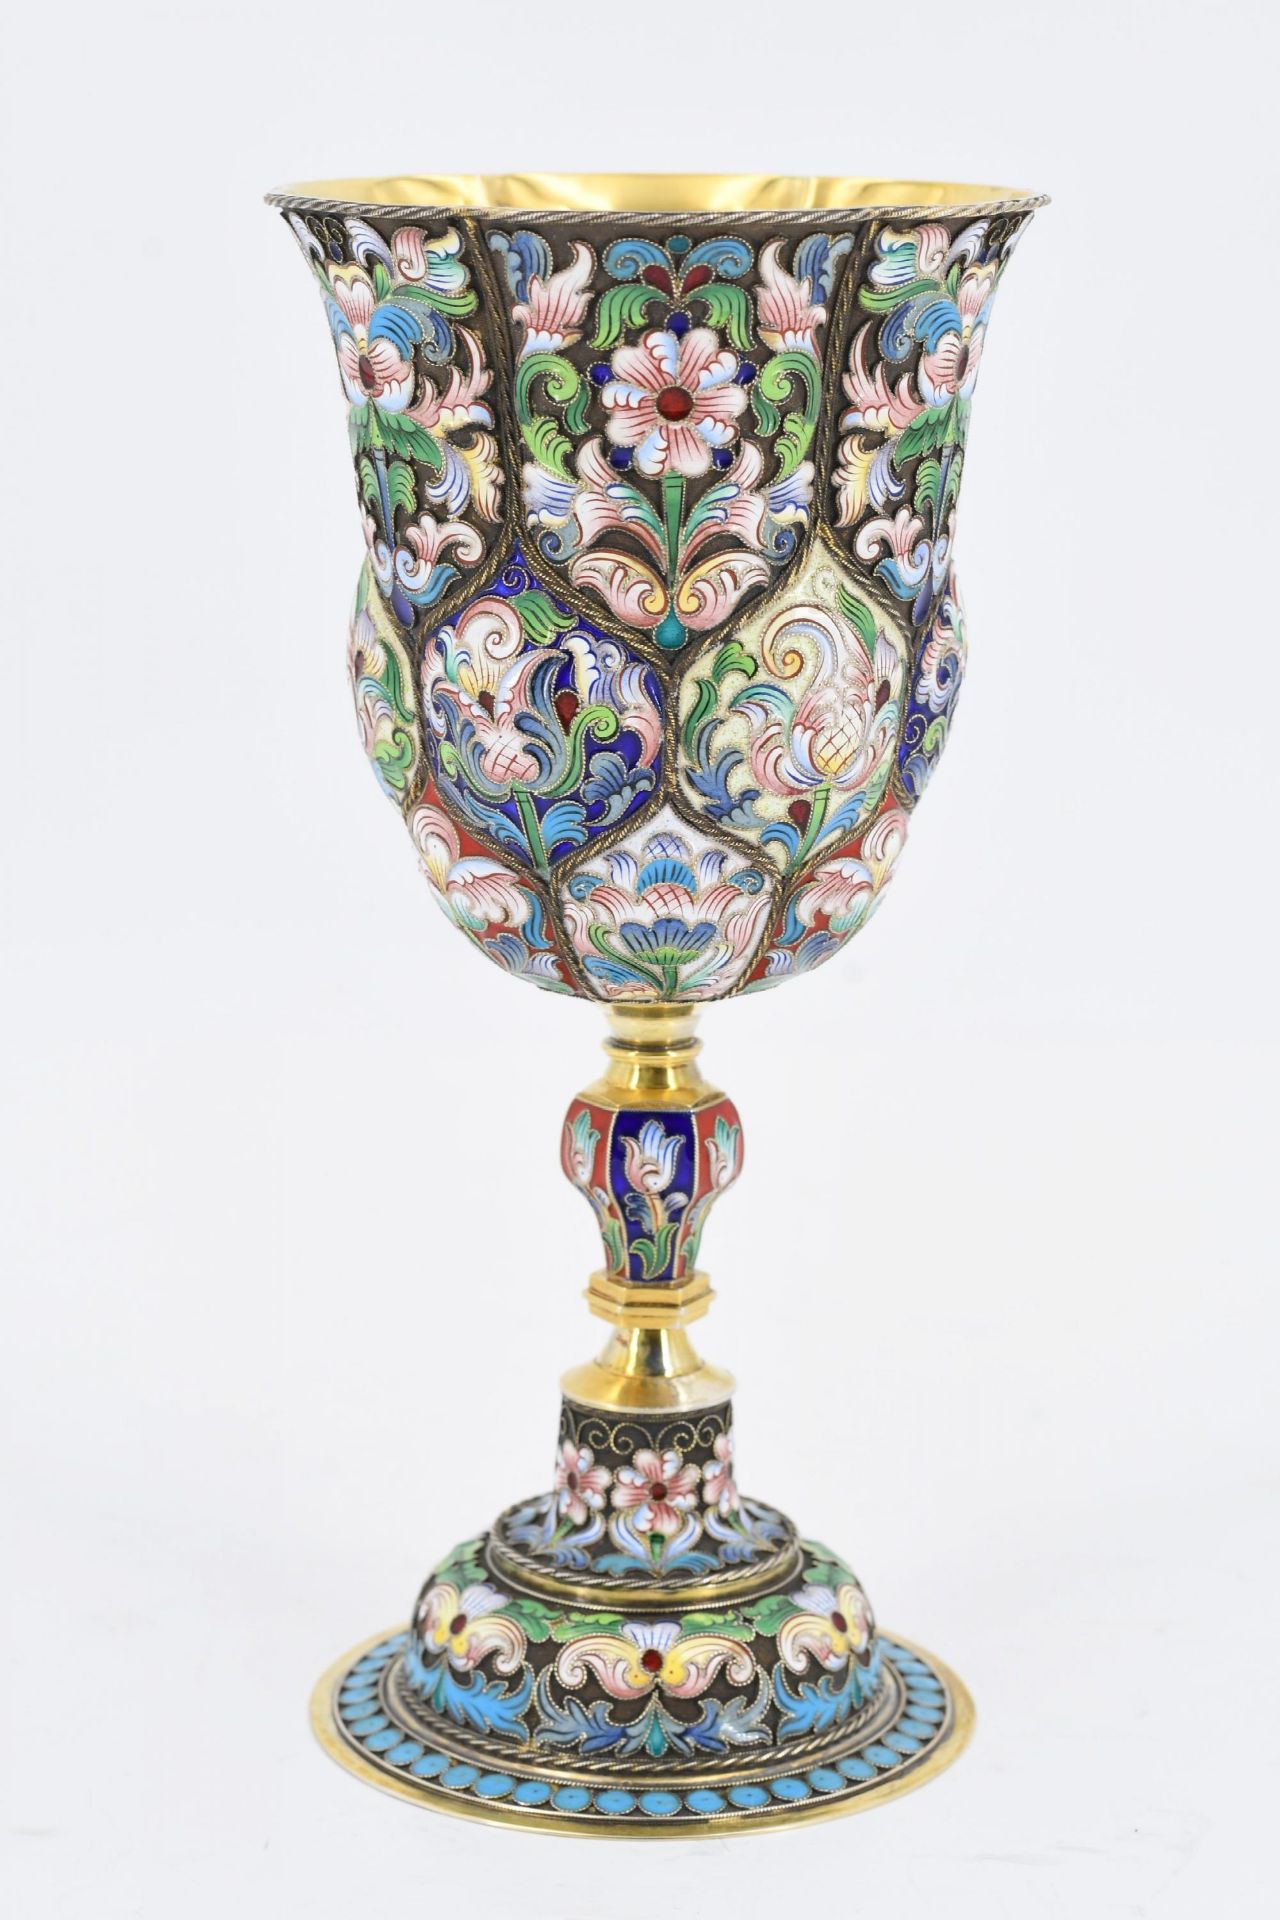 PRECIOUS SET OF SIX SILVER GOBLETS WITH CLOISONNÉ DECOR - Image 4 of 7